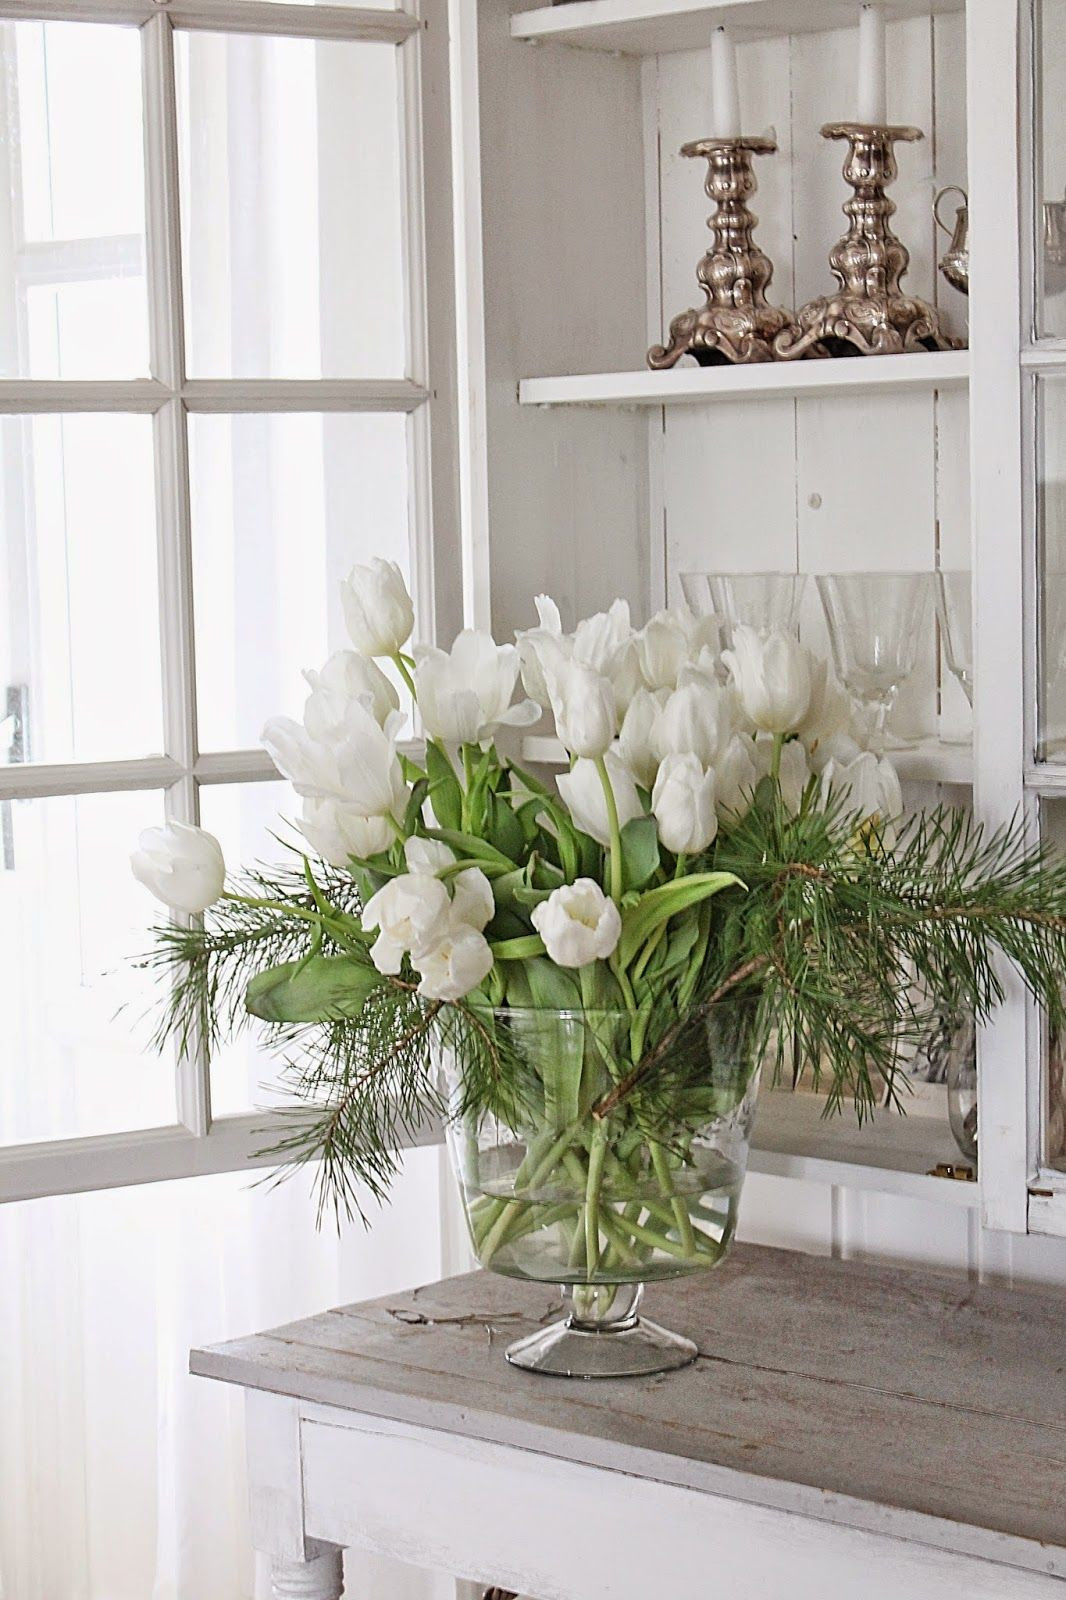 13 Awesome White Tulip Vase 2024 free download white tulip vase of something we could all diy dont you agree beautiful crisp white with something we could all diy dont you agree beautiful crisp white tulips are classic djw